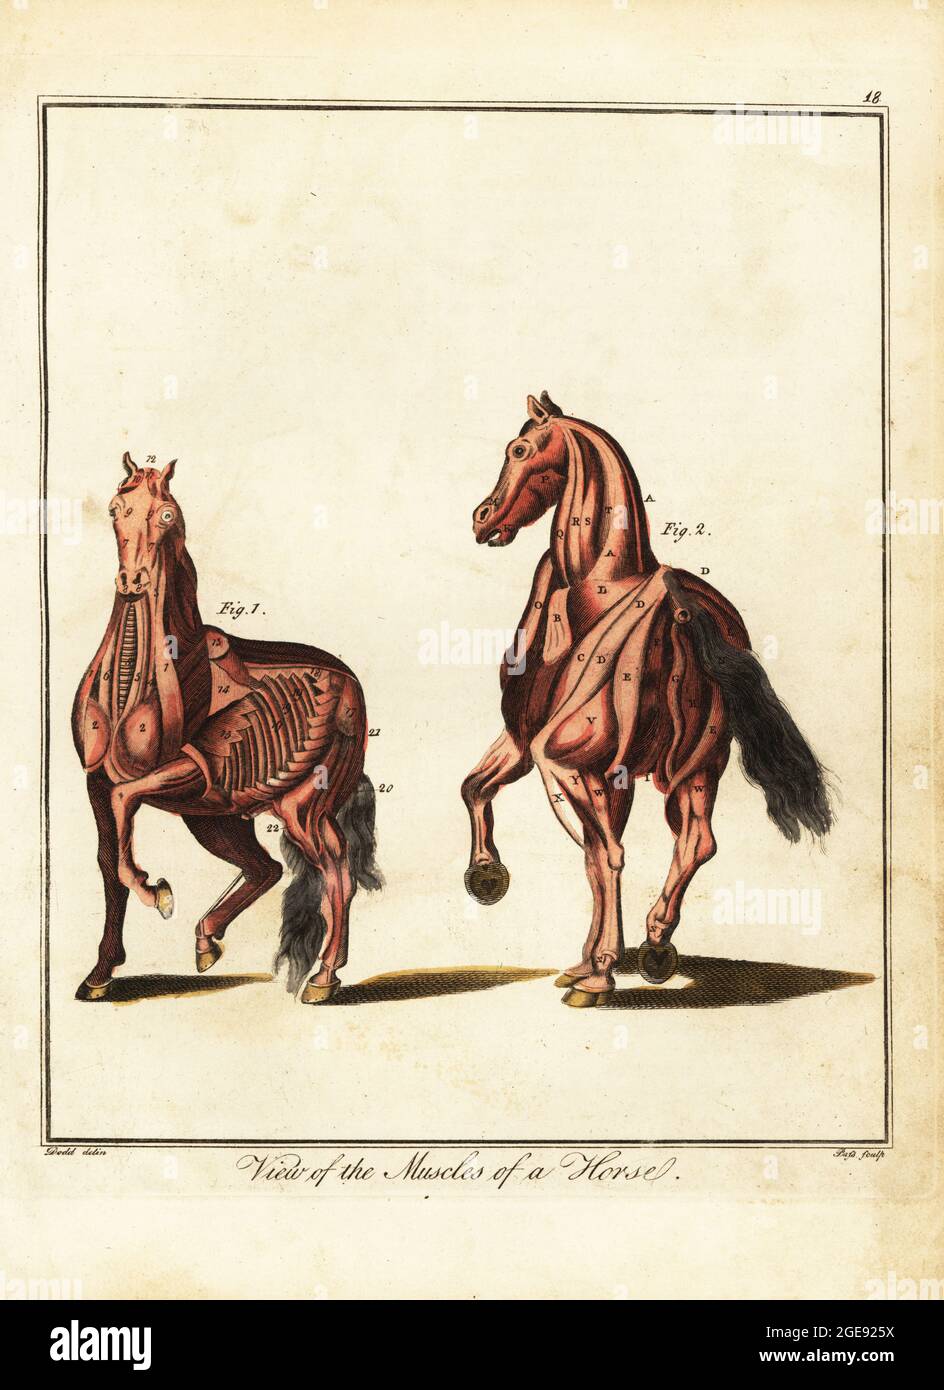 Musculature of a horse. View of the muscles of a horse. Par mastoideum, par trigeminum, par triangulare, windpipe, par longum, philtrum, cucullaris, deltoides, pectorals, serratus posticus, buttocks., etc. Handcoloured copperplate engraving by J. Pass after an illustration by Daniel Dodd from William Augustus Osbaldiston’s The British Sportsman, or Nobleman, Gentleman and Farmer’s Dictionary of Recreation and Amusement, J. Stead, London, 1792. Stock Photo